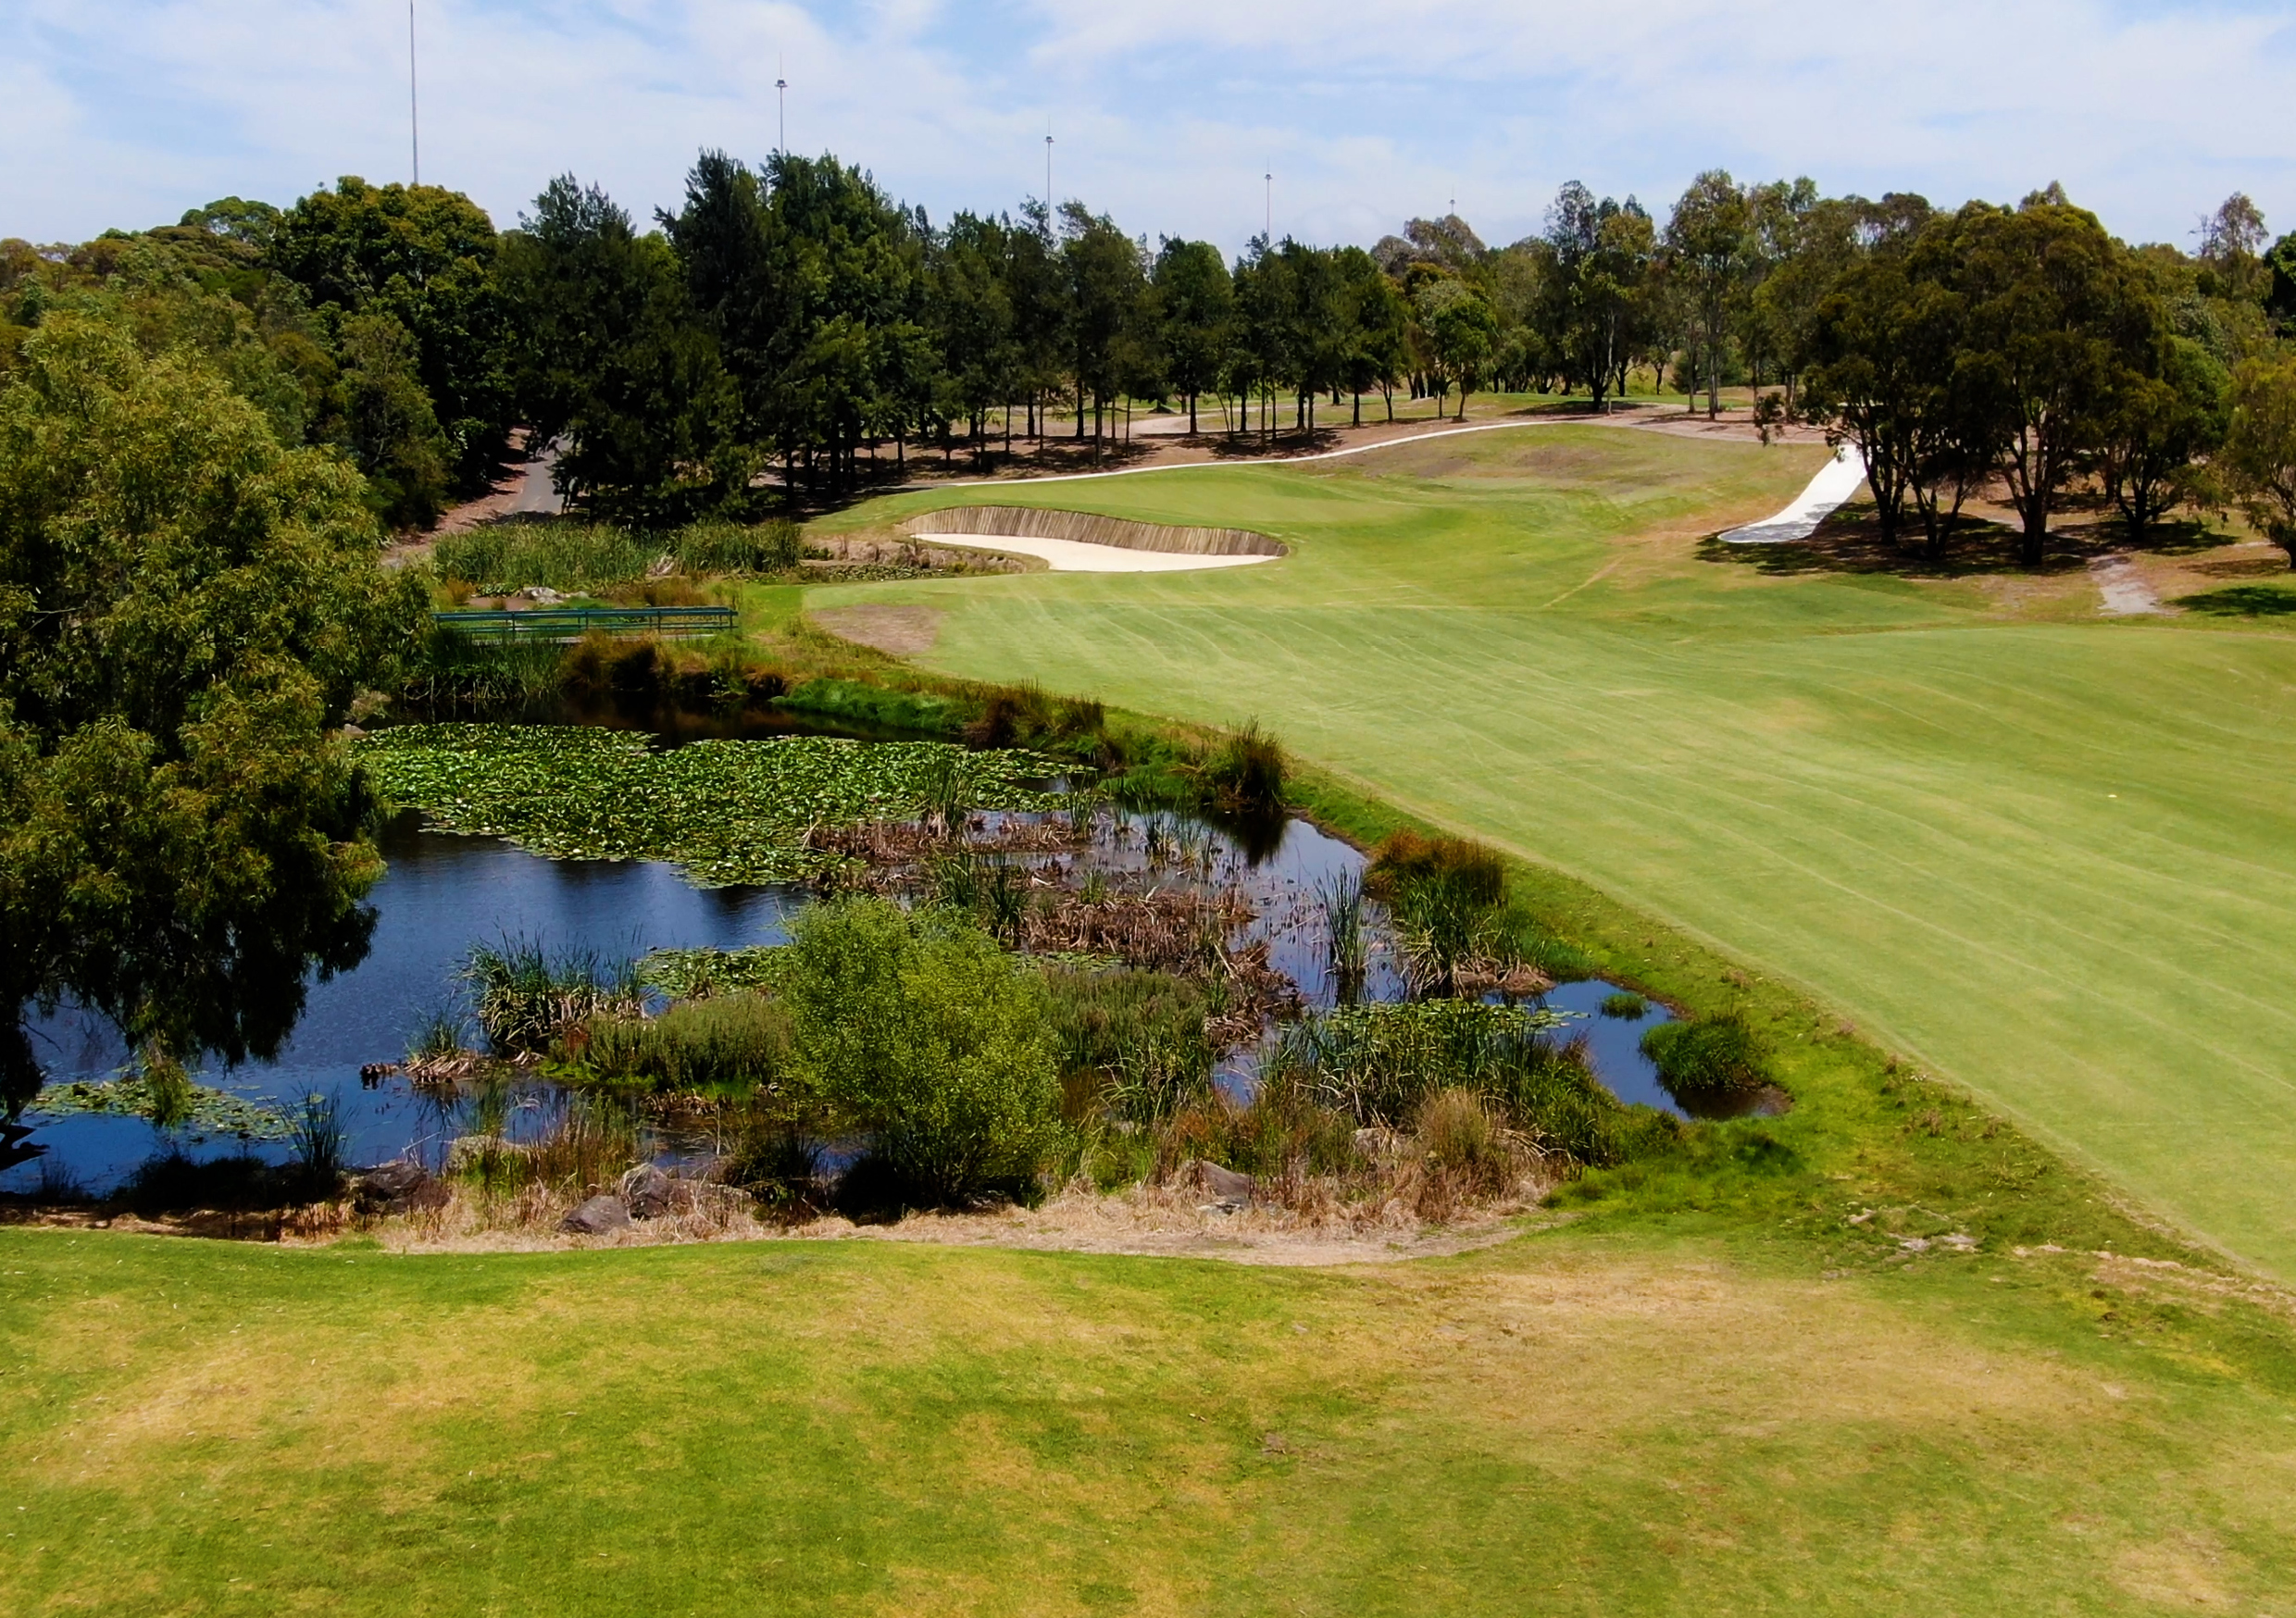 The freeway golf course showing the well kept fairway and surrounding waterway